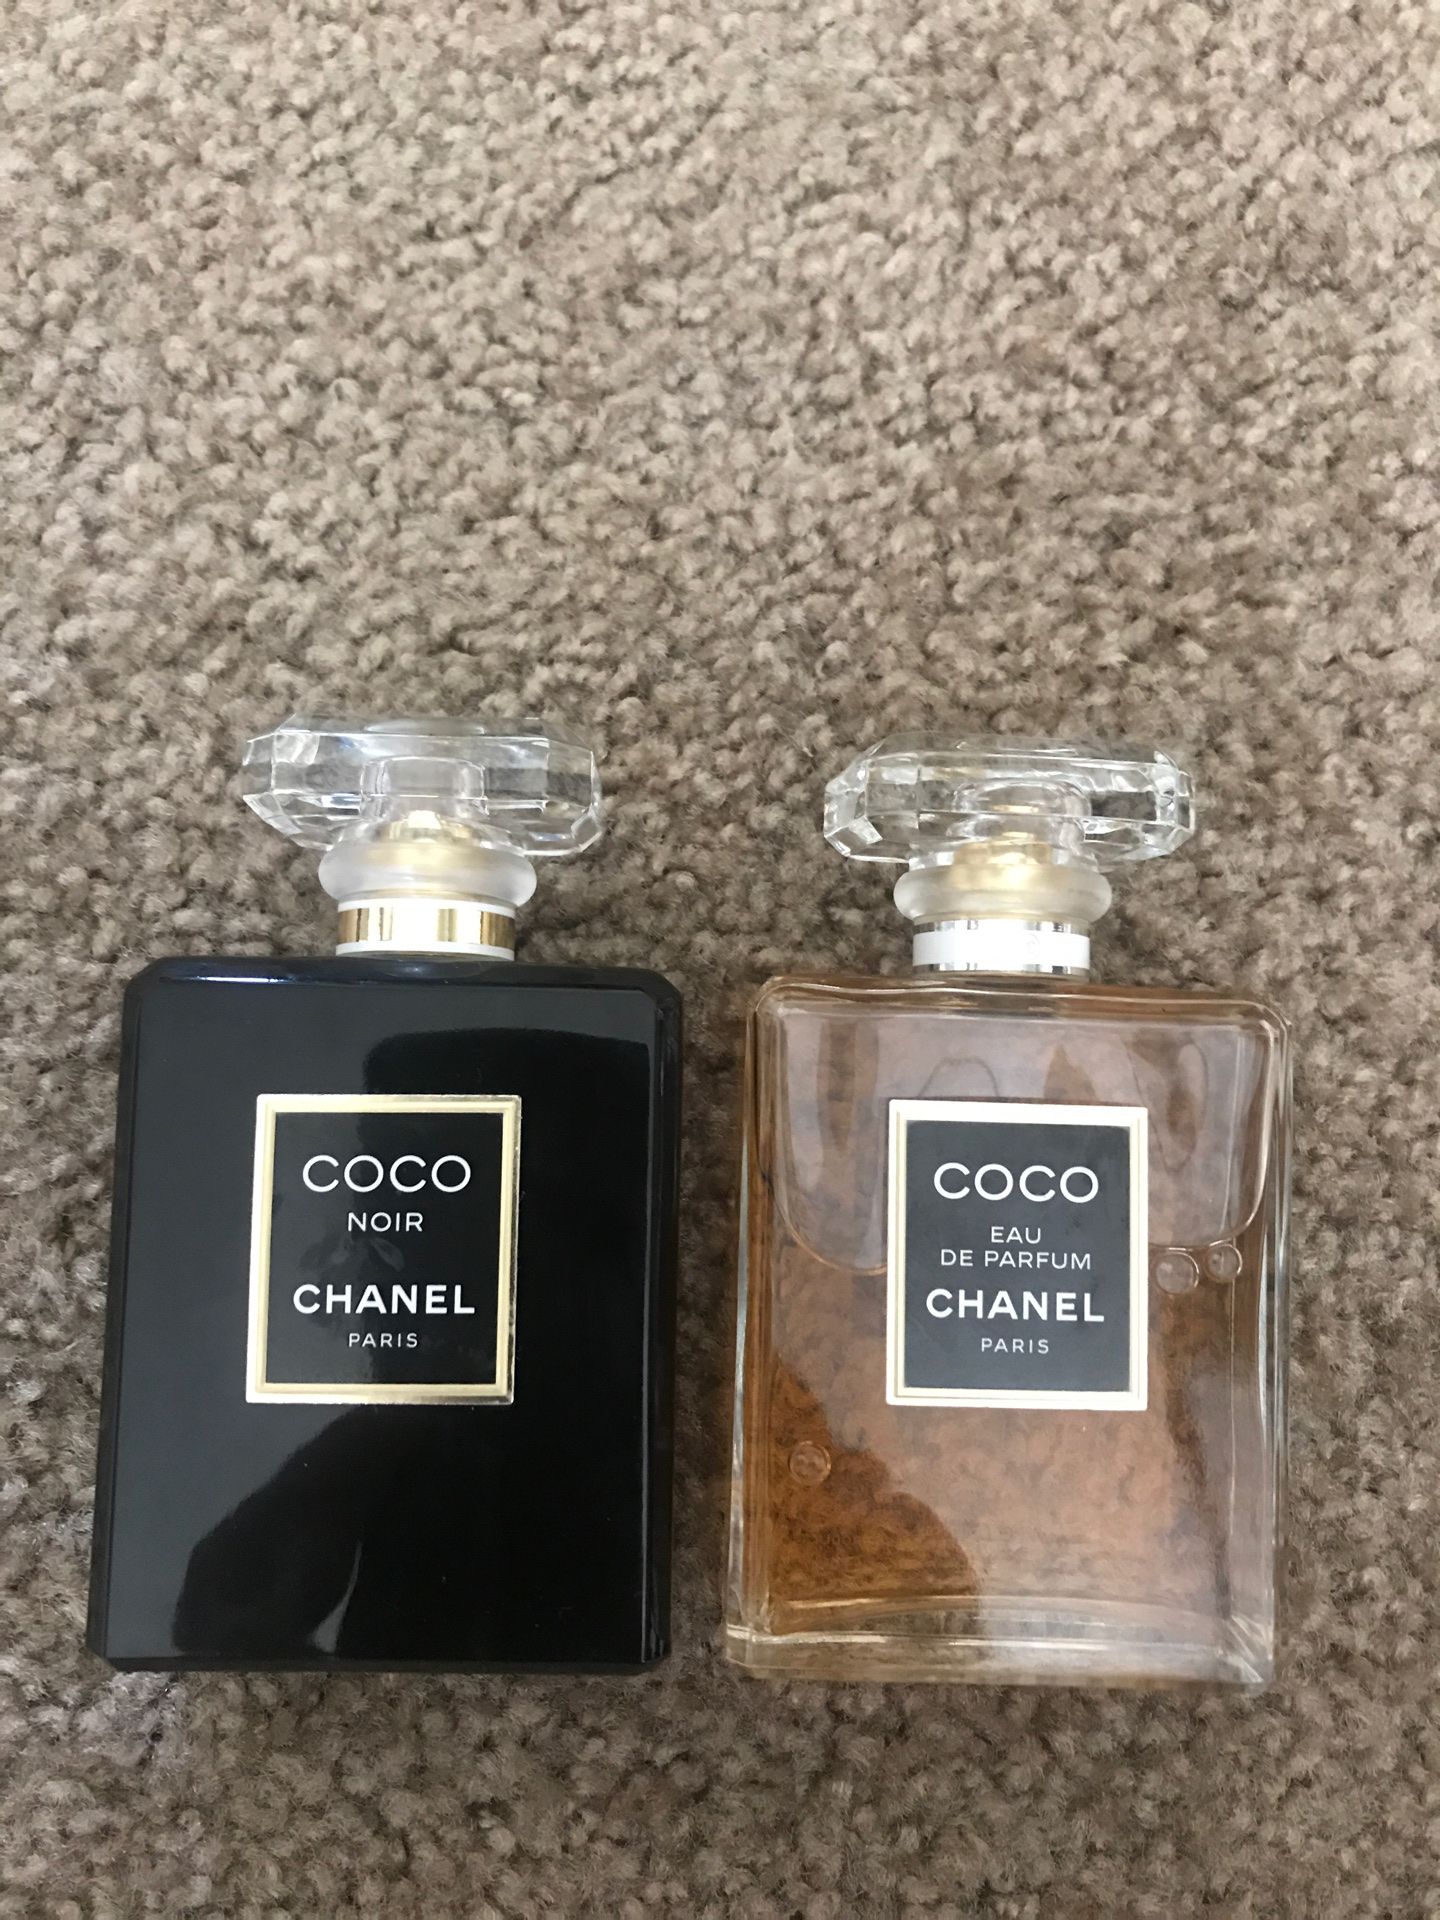 Almost Brand new CHANEL COCO” woman’s Perfumes